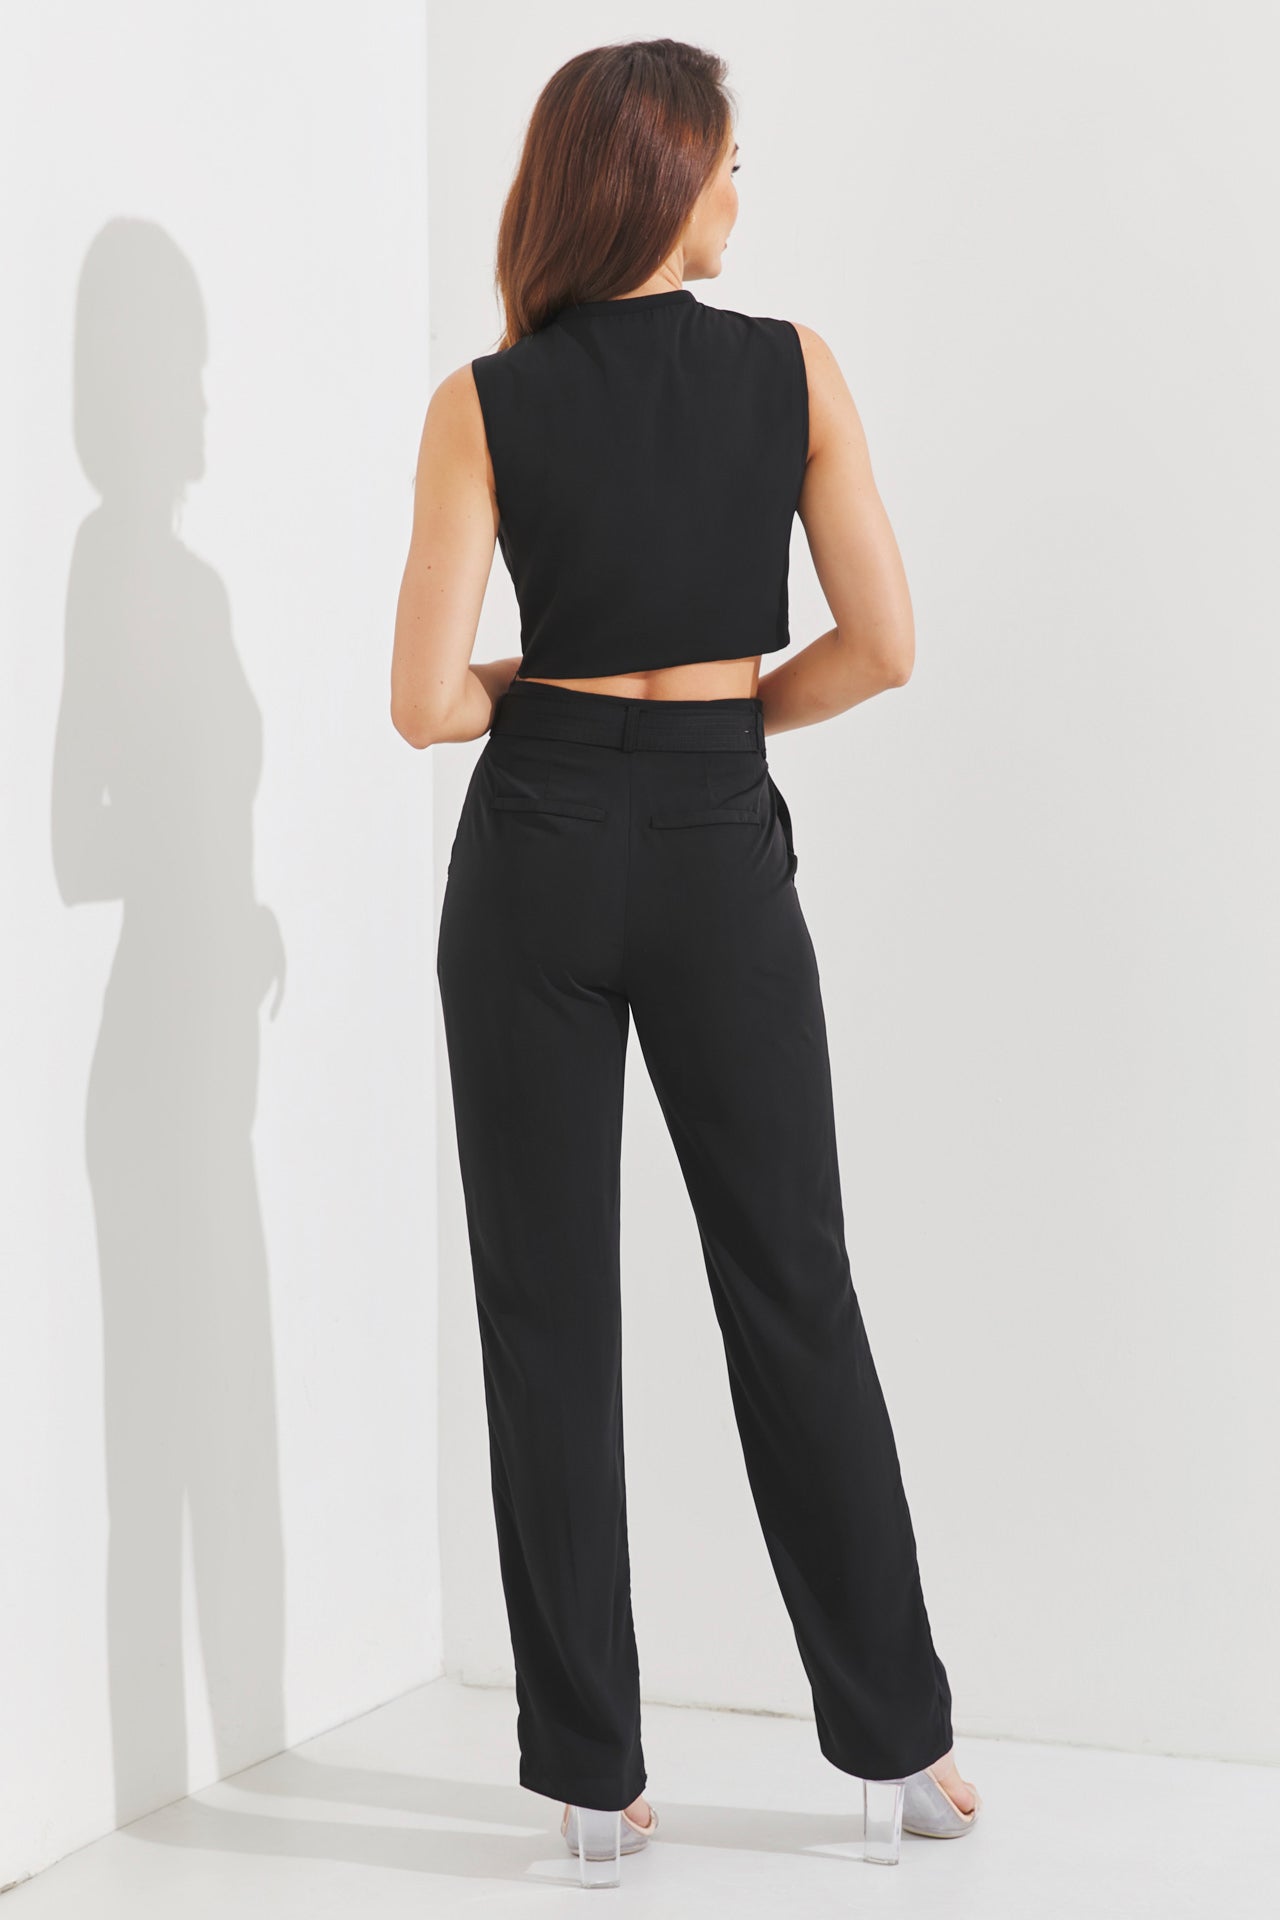 Woven Twisted Crop Top & Pants Set